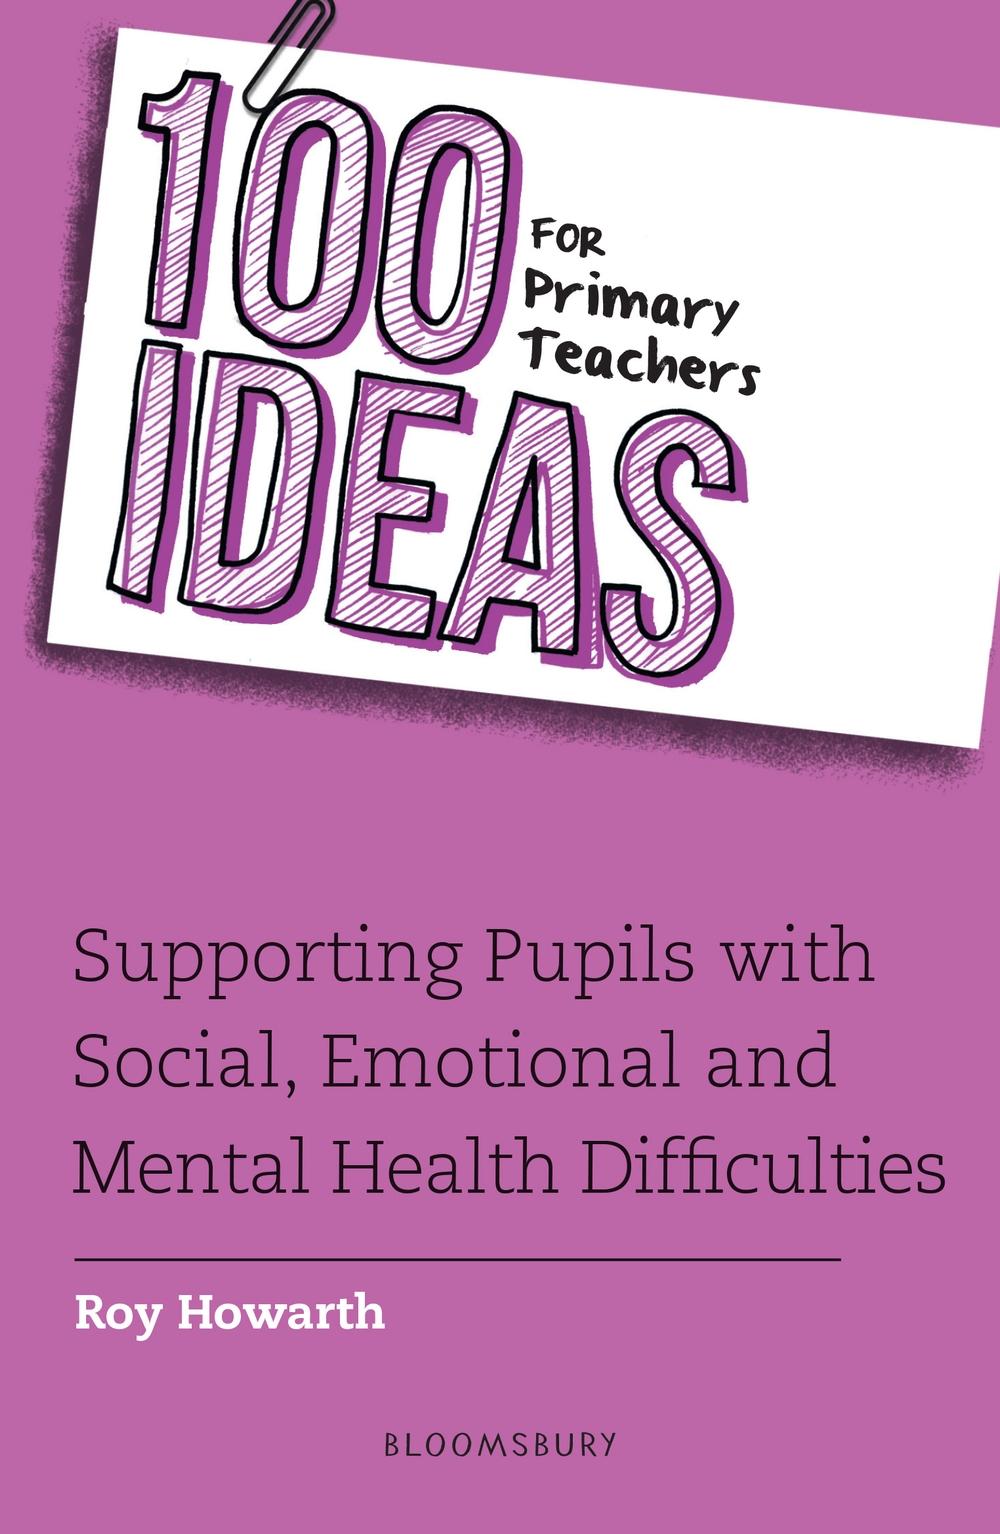 100 Ideas for Primary Teachers: Supporting Pupils with Socia